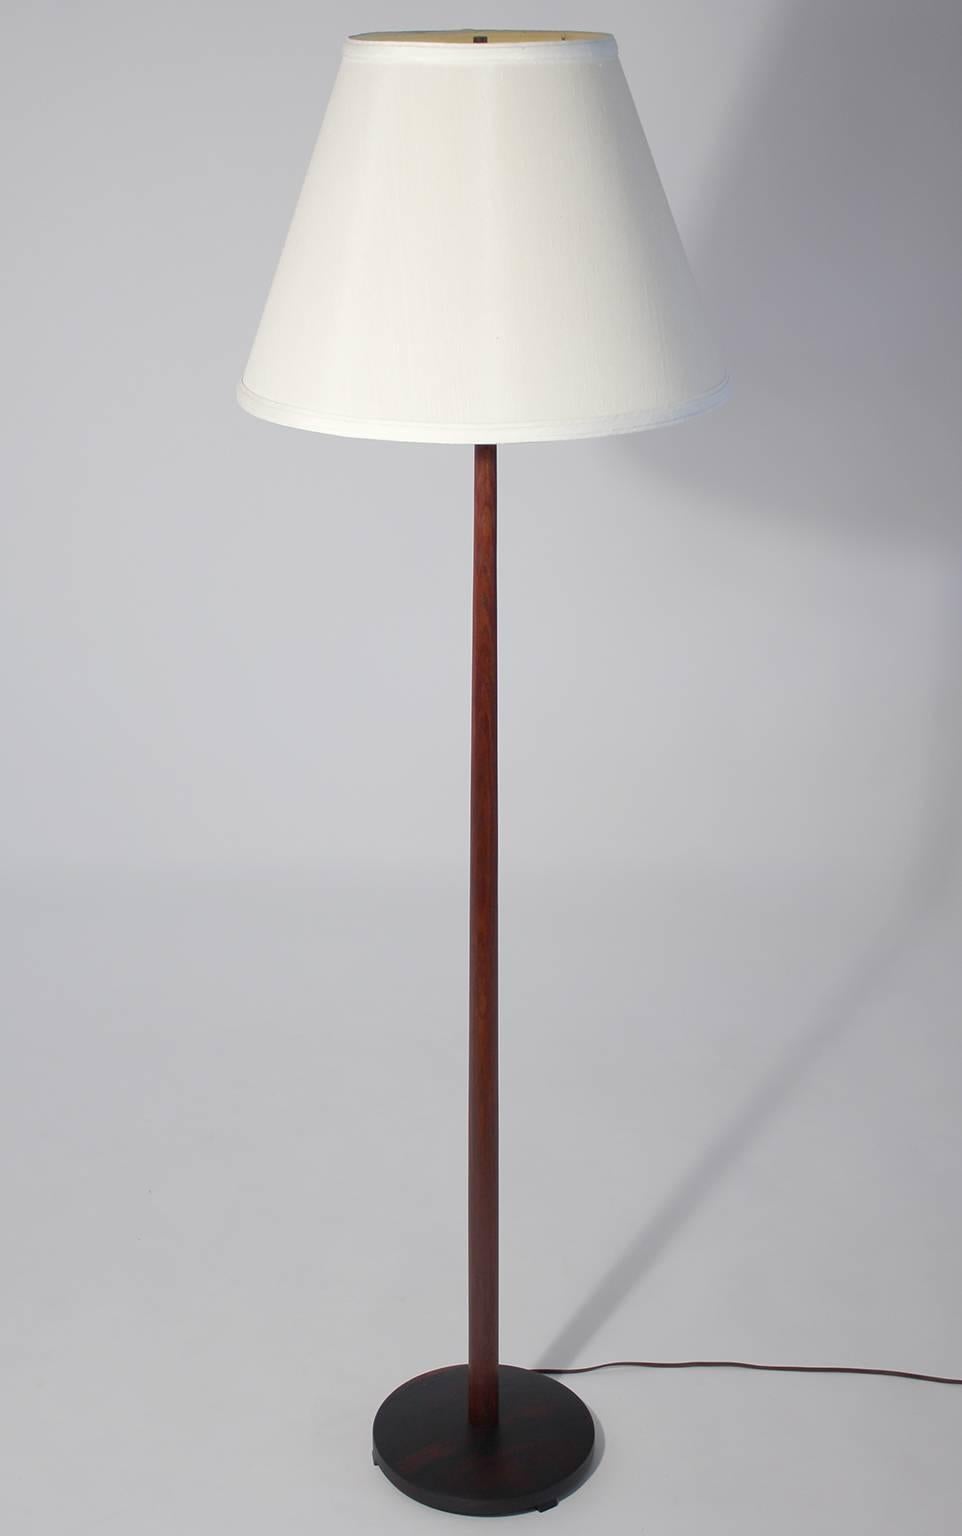 Vintage modernist rosewood floor lamp with weighted base made in Sweden, circa 1960s. Measures: Overall height of 58.5